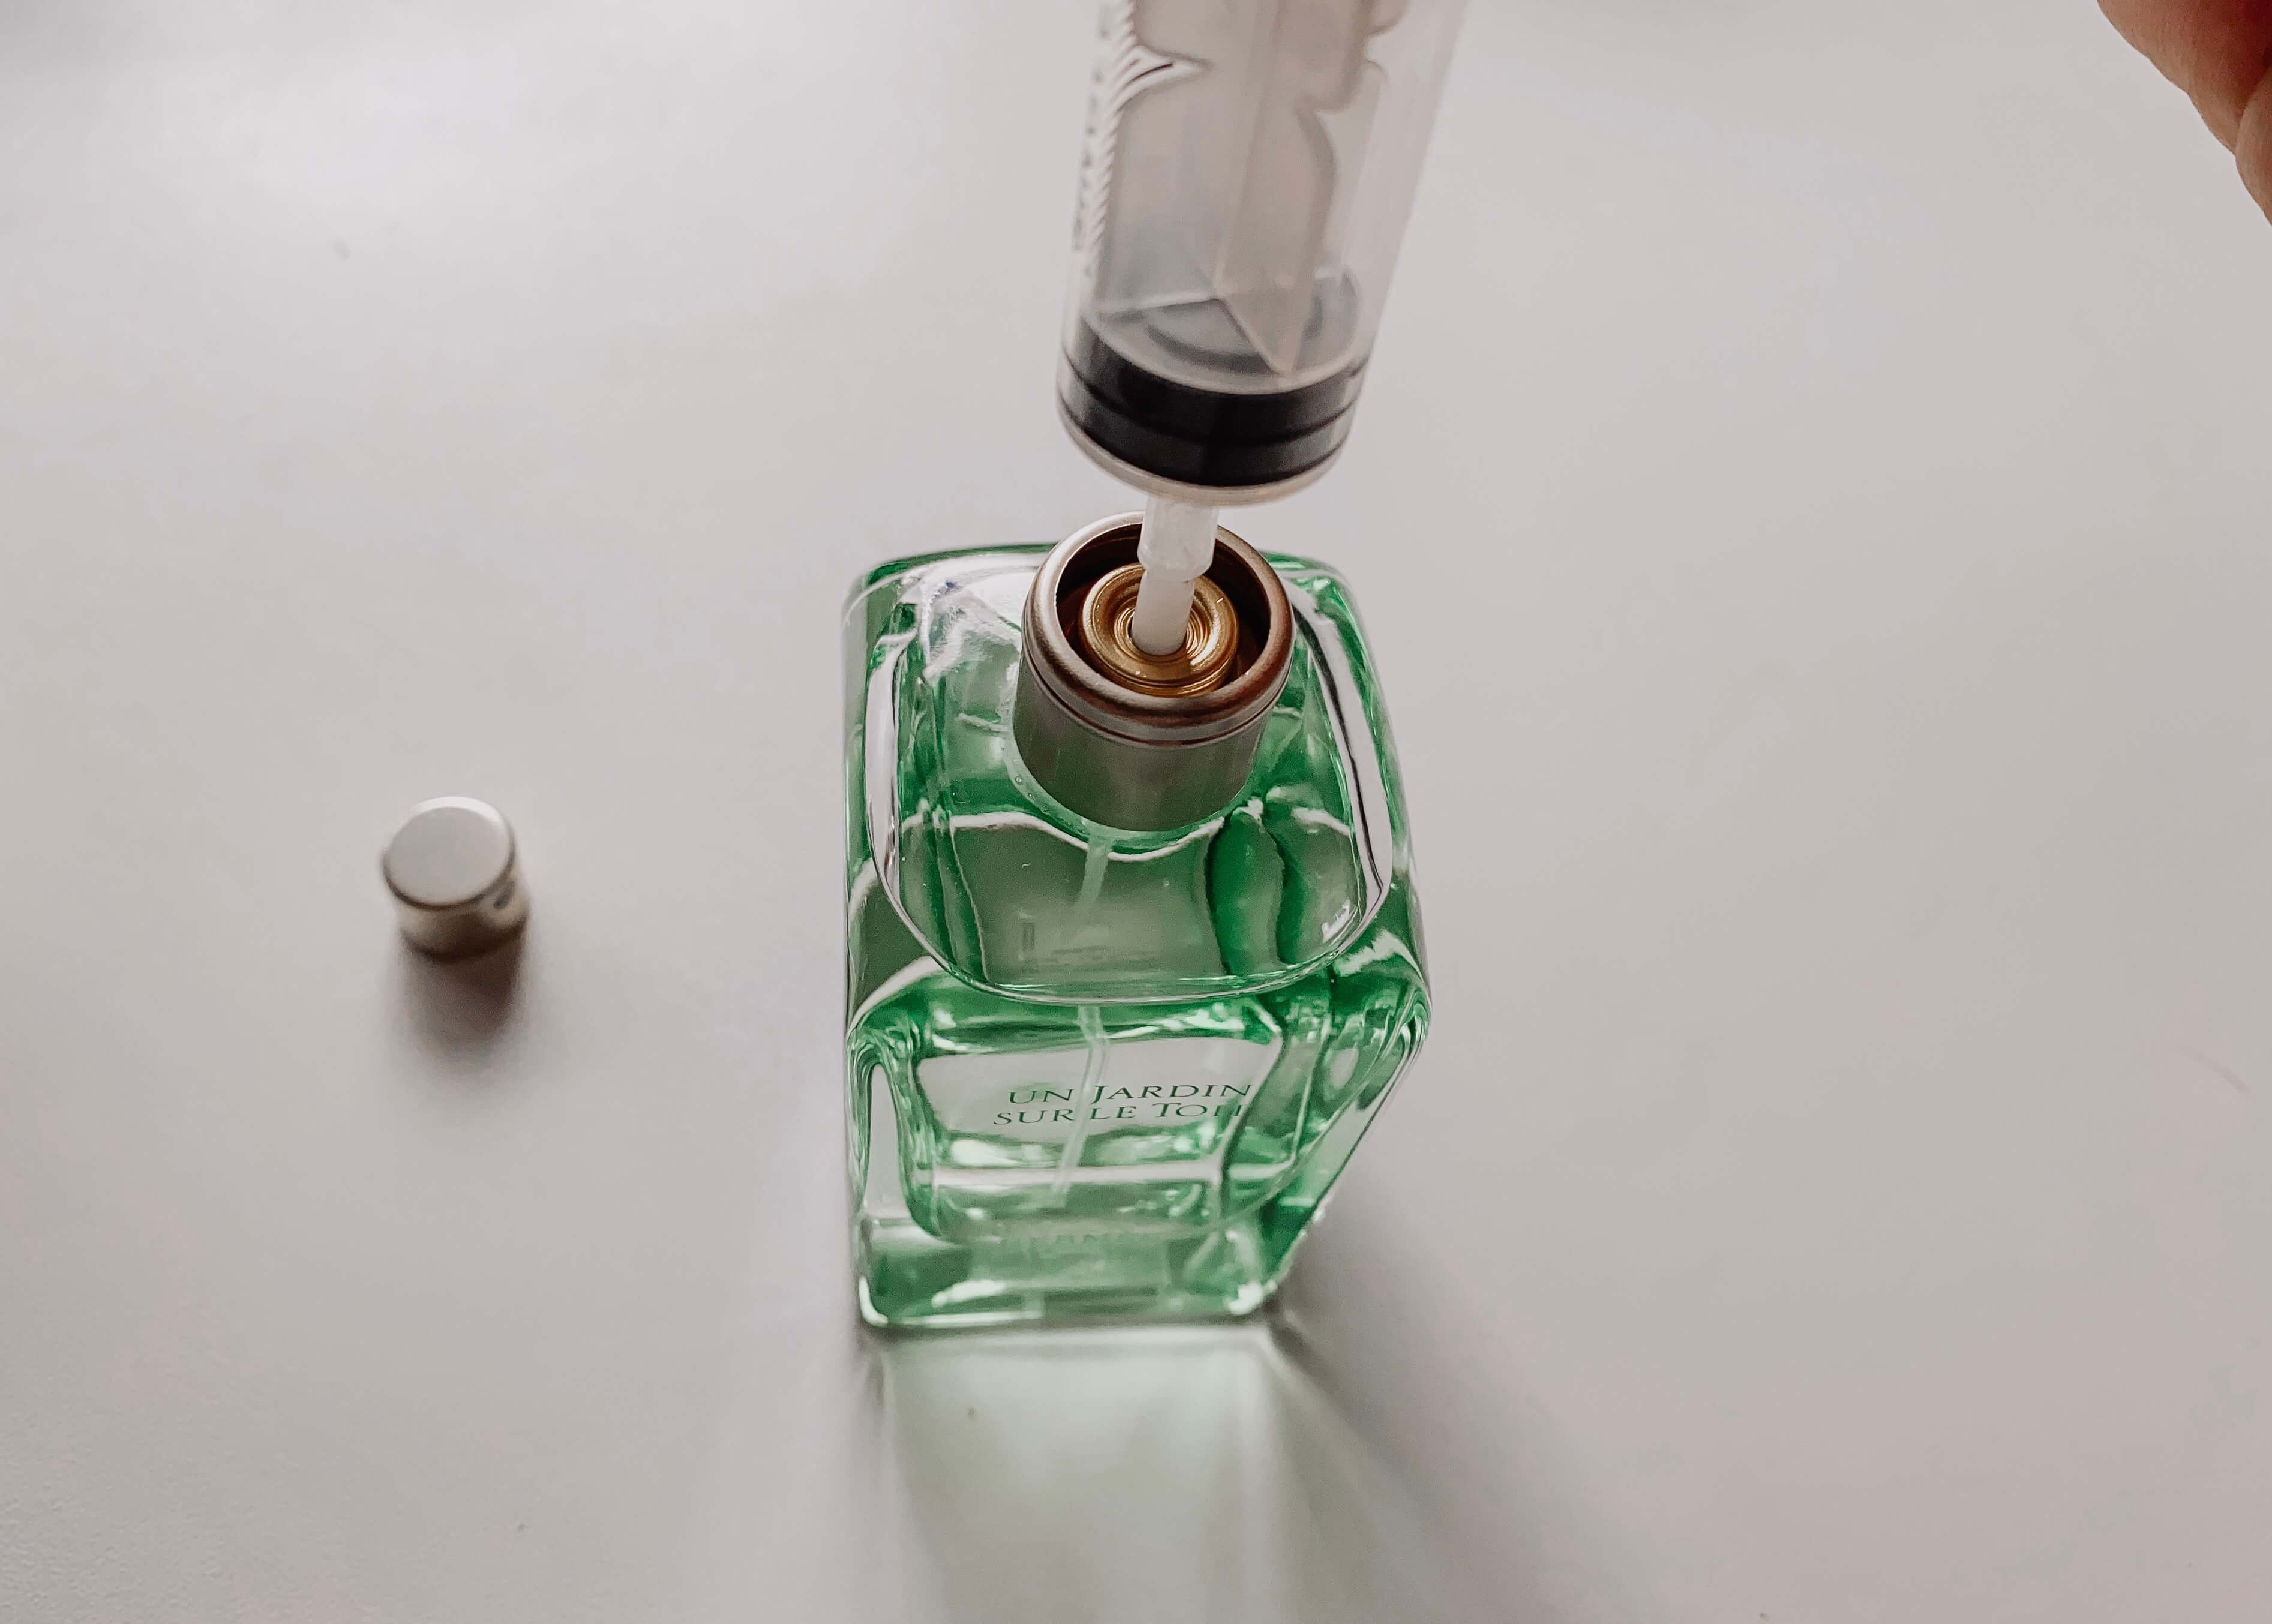 using a syringe to decant perfume